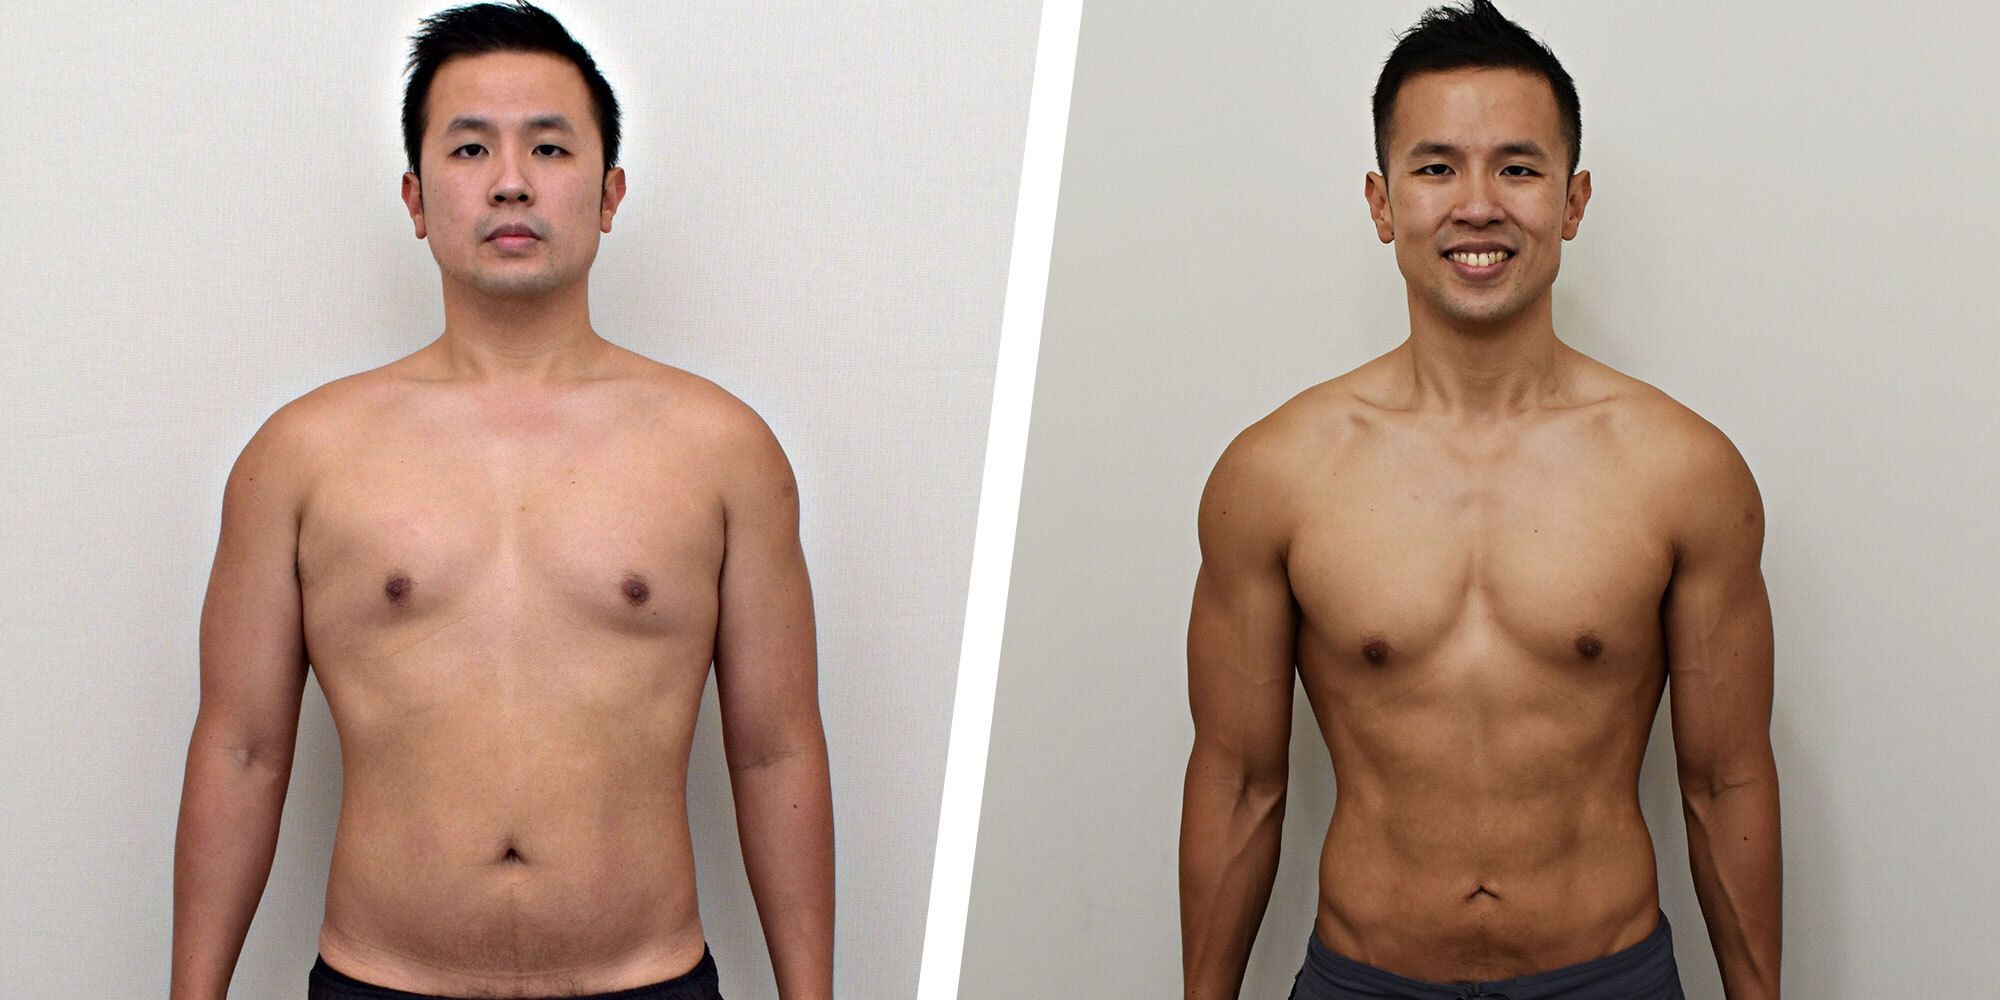 The Diet and Workout That Helped This Man Lose Over 50 Pounds in a Year